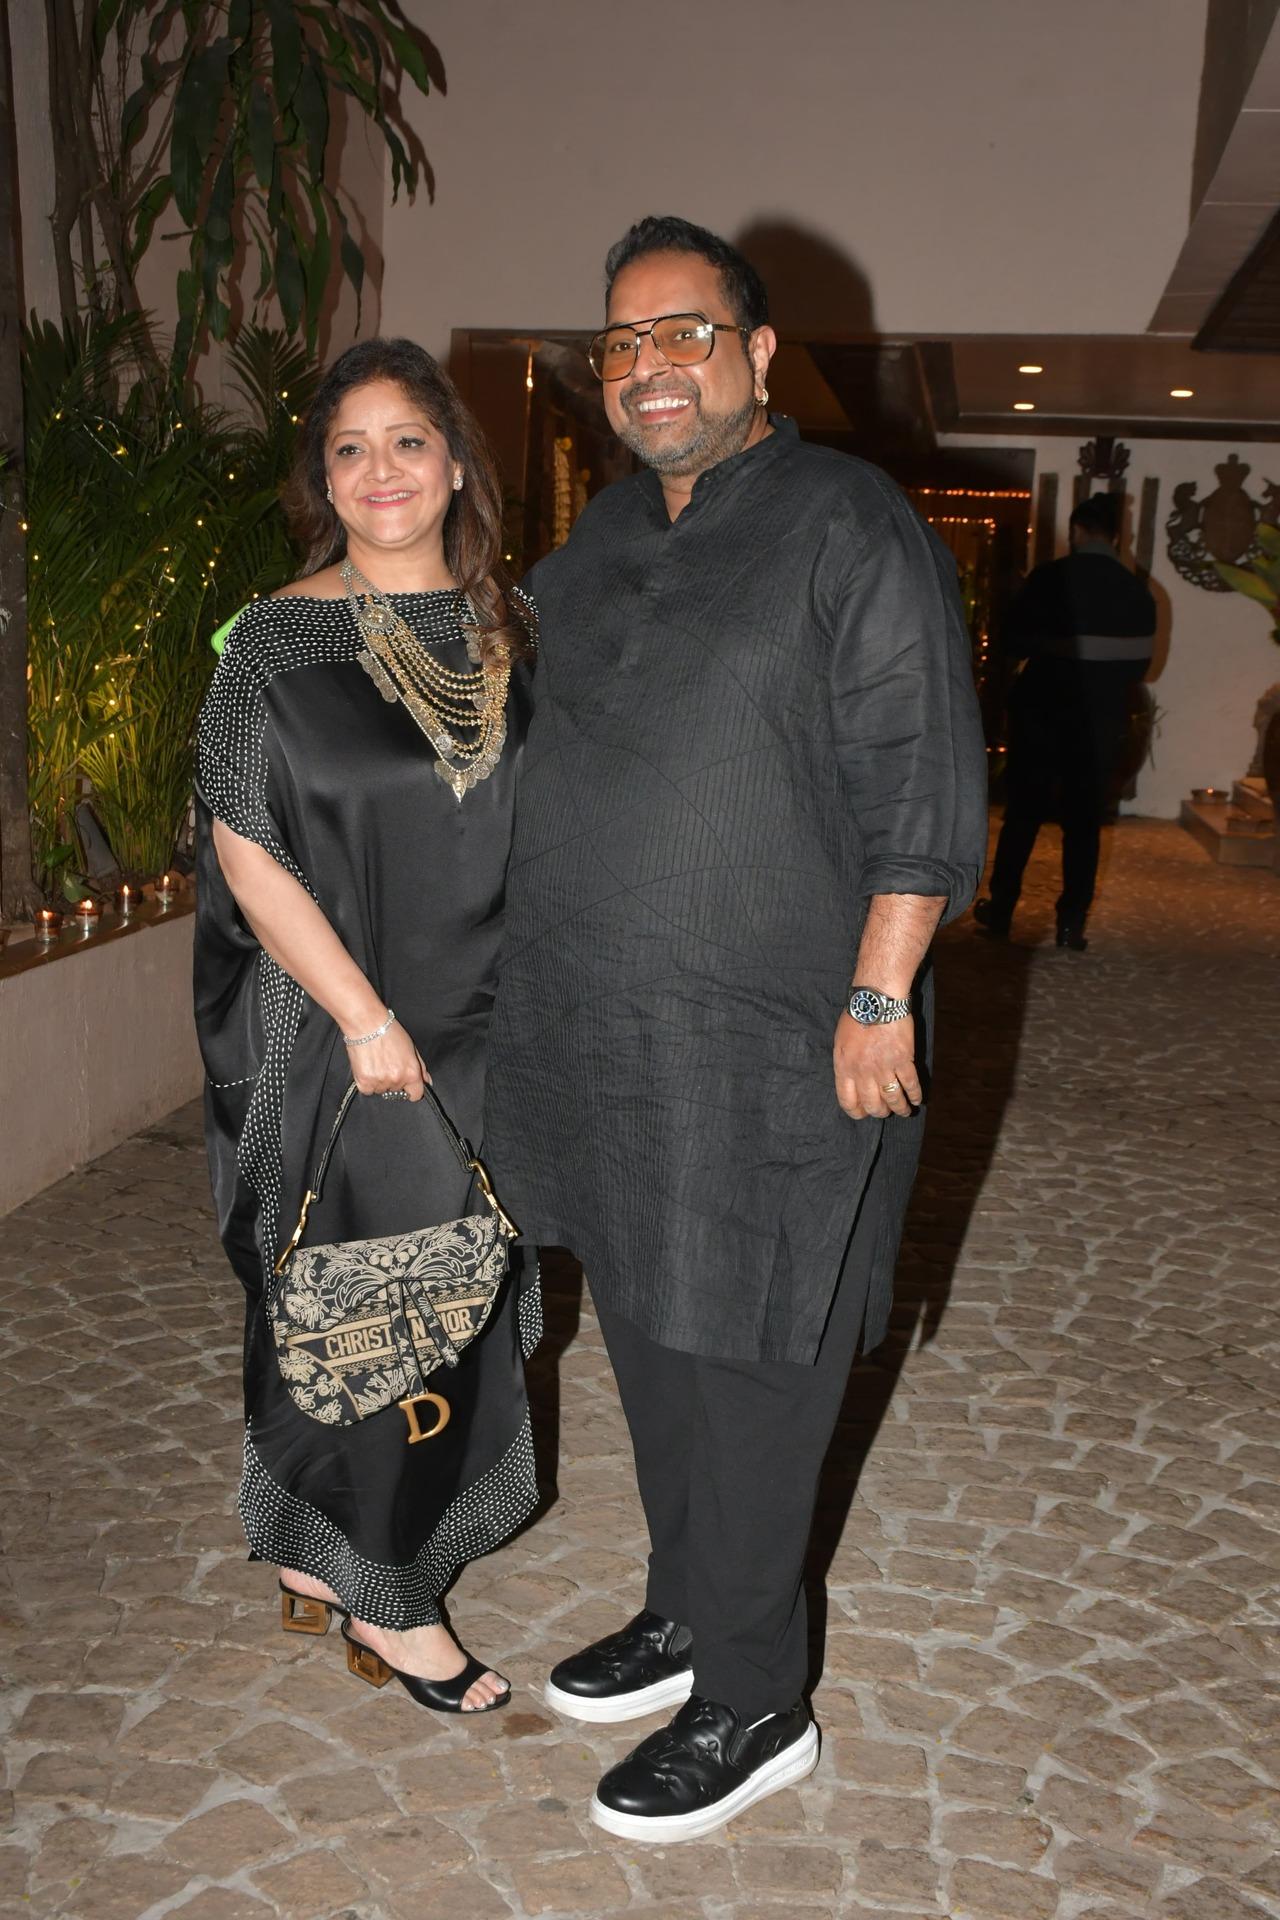 Singer Shankar Mahadevan arrived in an all-black outfit twinning with his wife